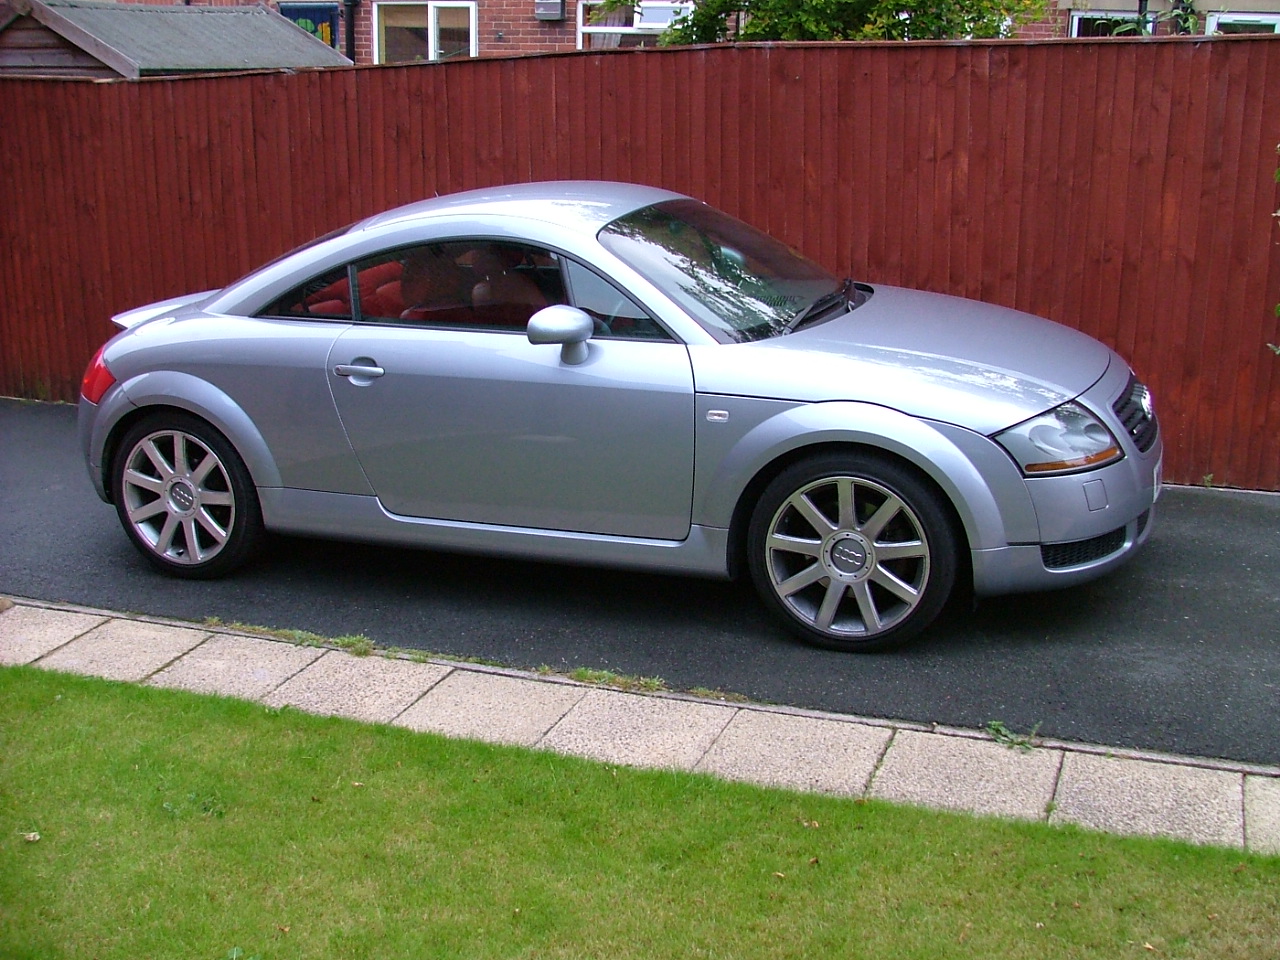 2002 Audi Tt Information And Photos Neo Drive